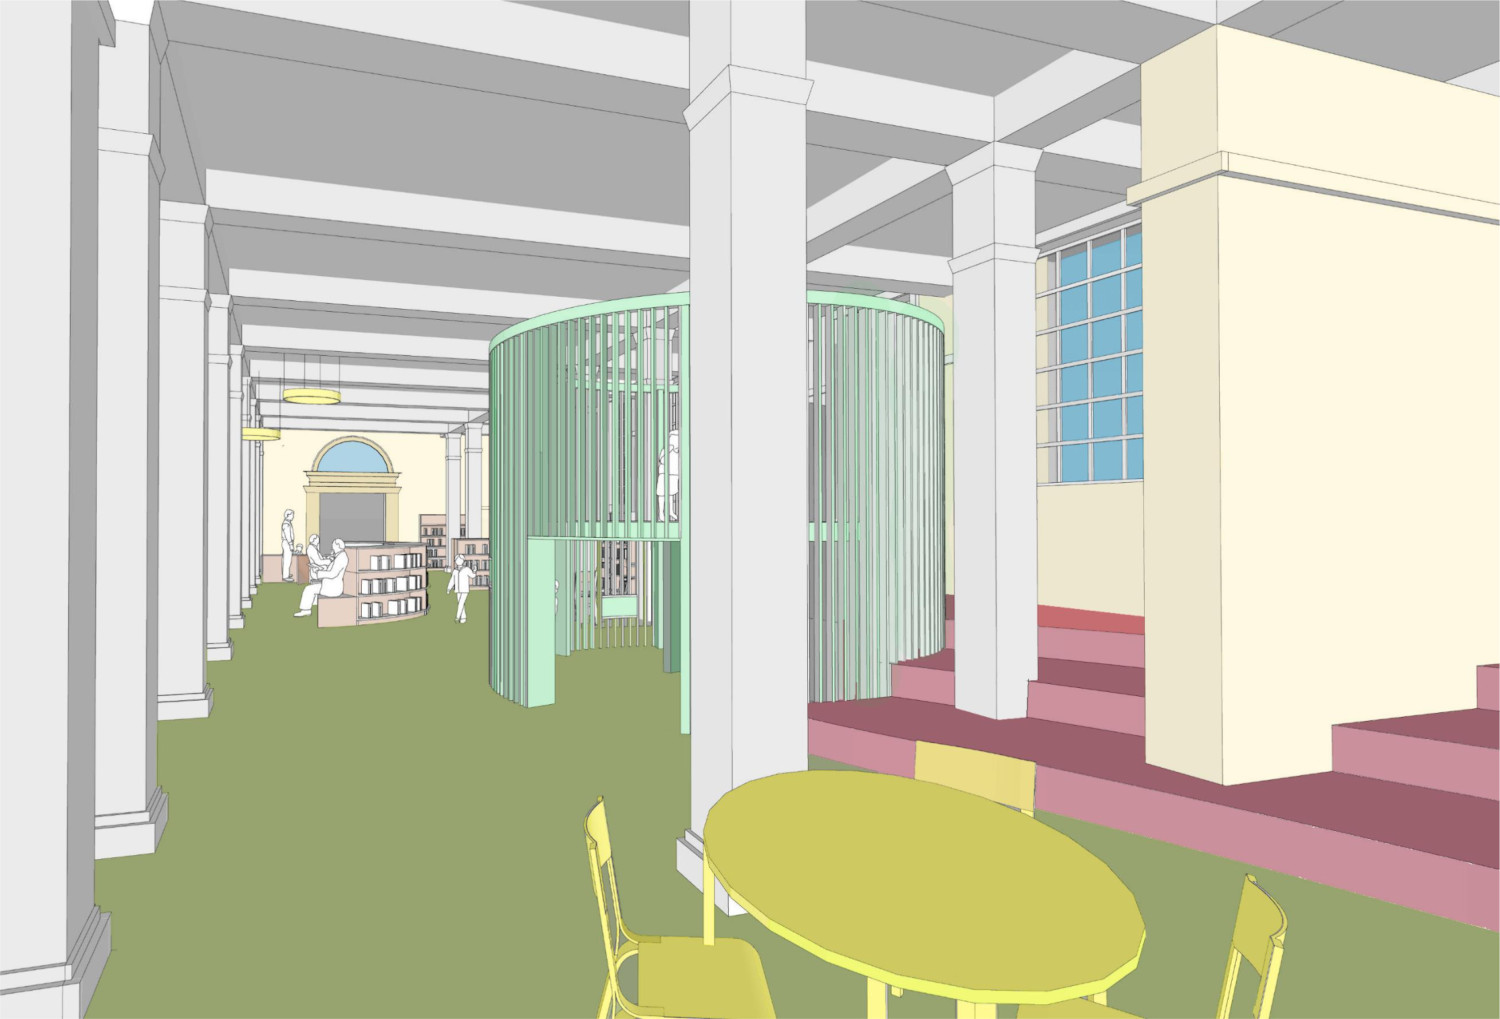 Artist's impression of the renovations at Central Library